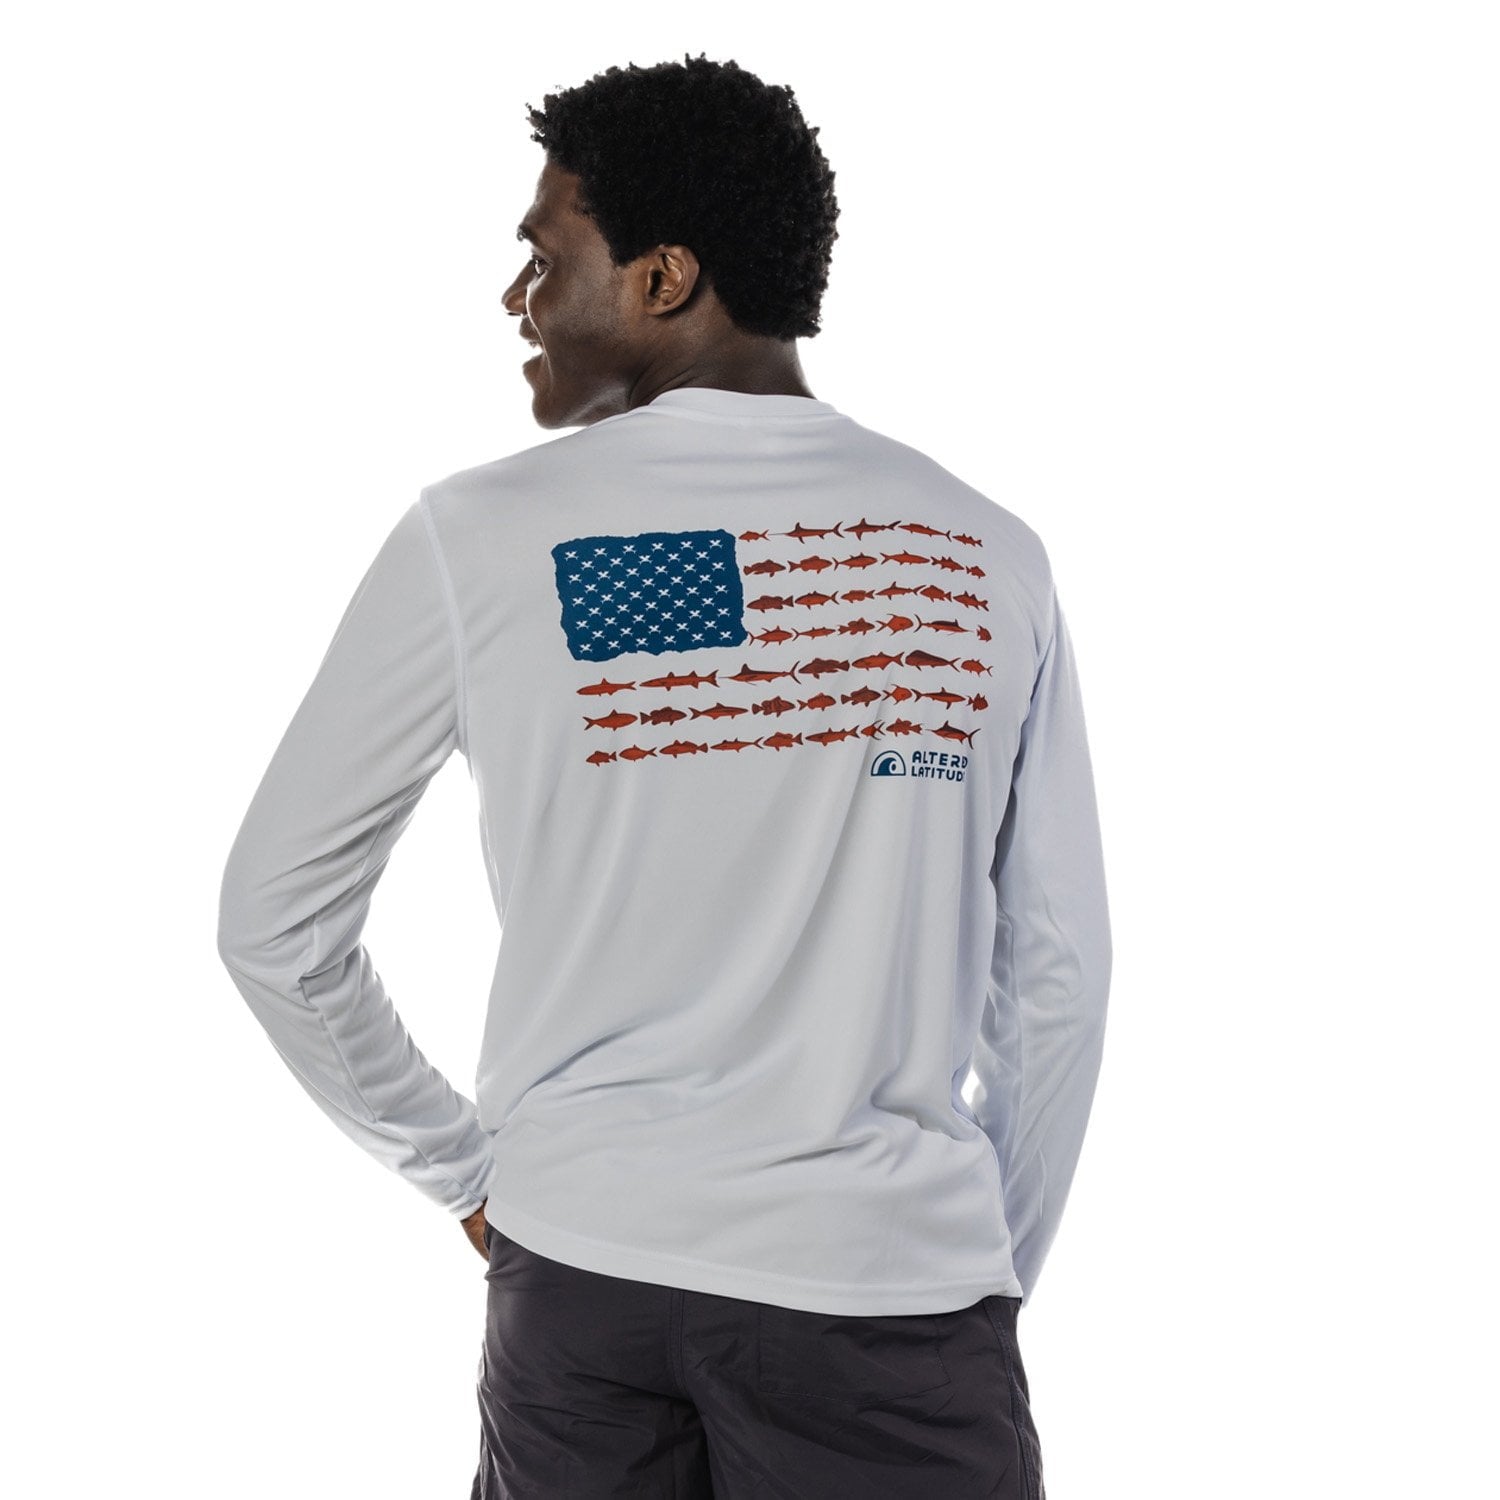 Crappie Fishing American Flag Fishing Shirts For Men Performance Long  Sleeve Uv Protection Quick Dry Customize Name Upf 30+ Nqs2435